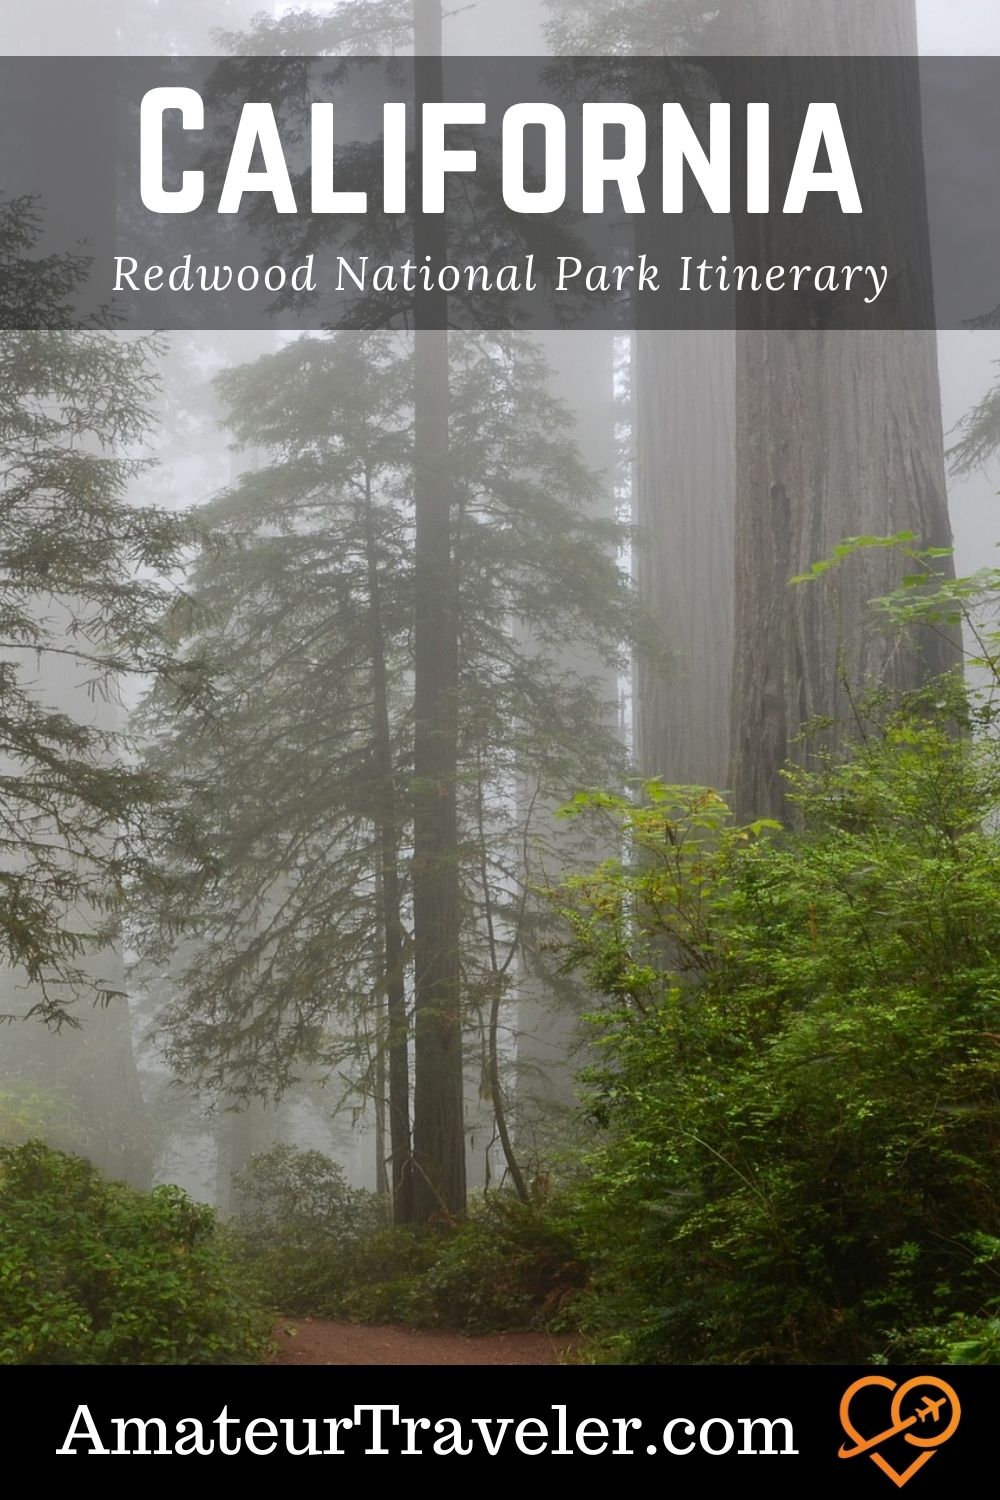 Redwood National Park Itinerary - Big Trees on the California Coast | edwood National Park #redwoods #trees #hikes #california #usa #travel #trip #vacation